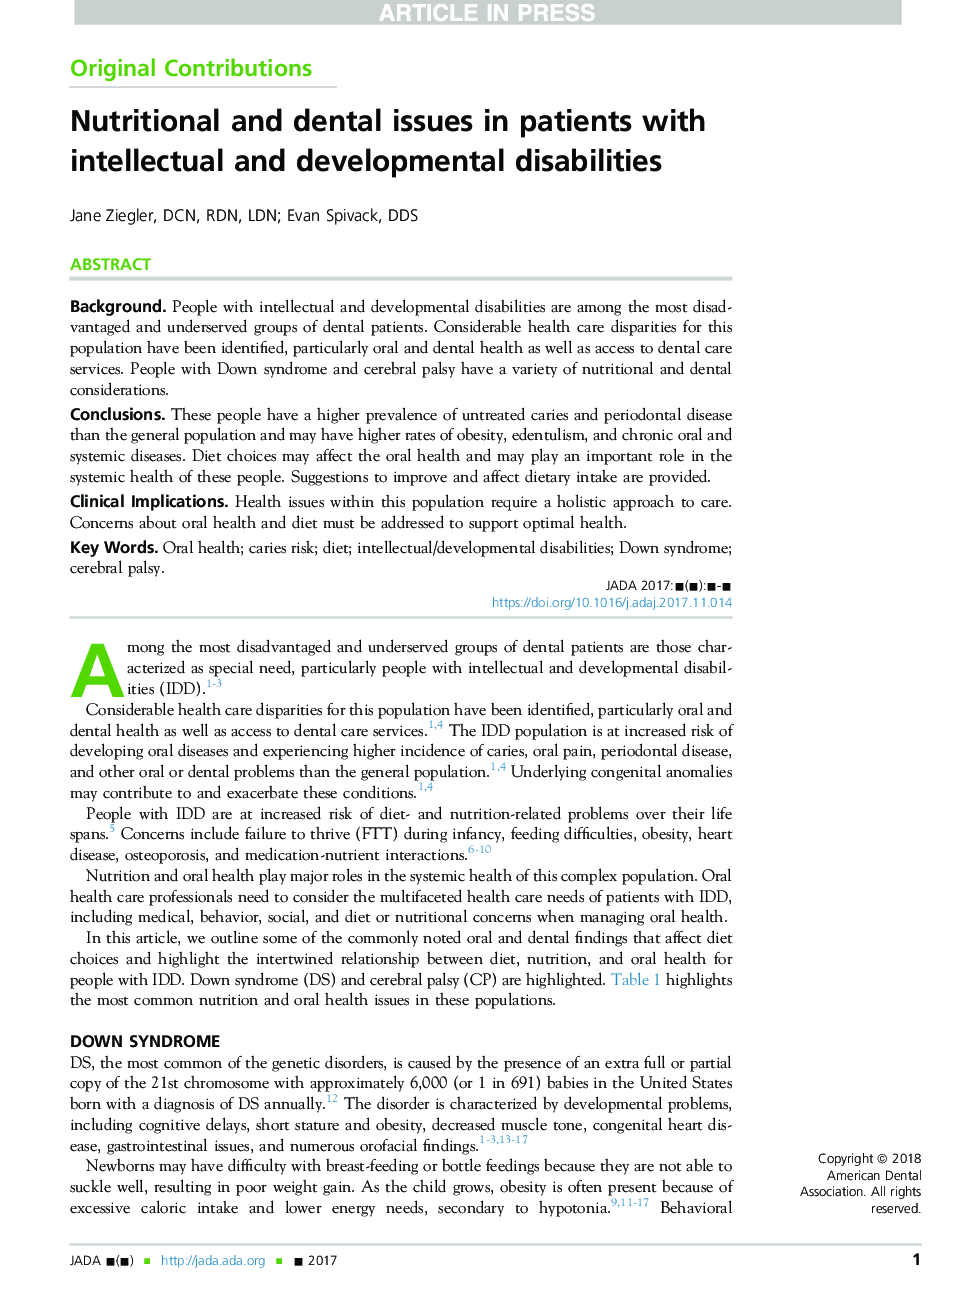 Nutritional and dental issues in patients with intellectual and developmental disabilities